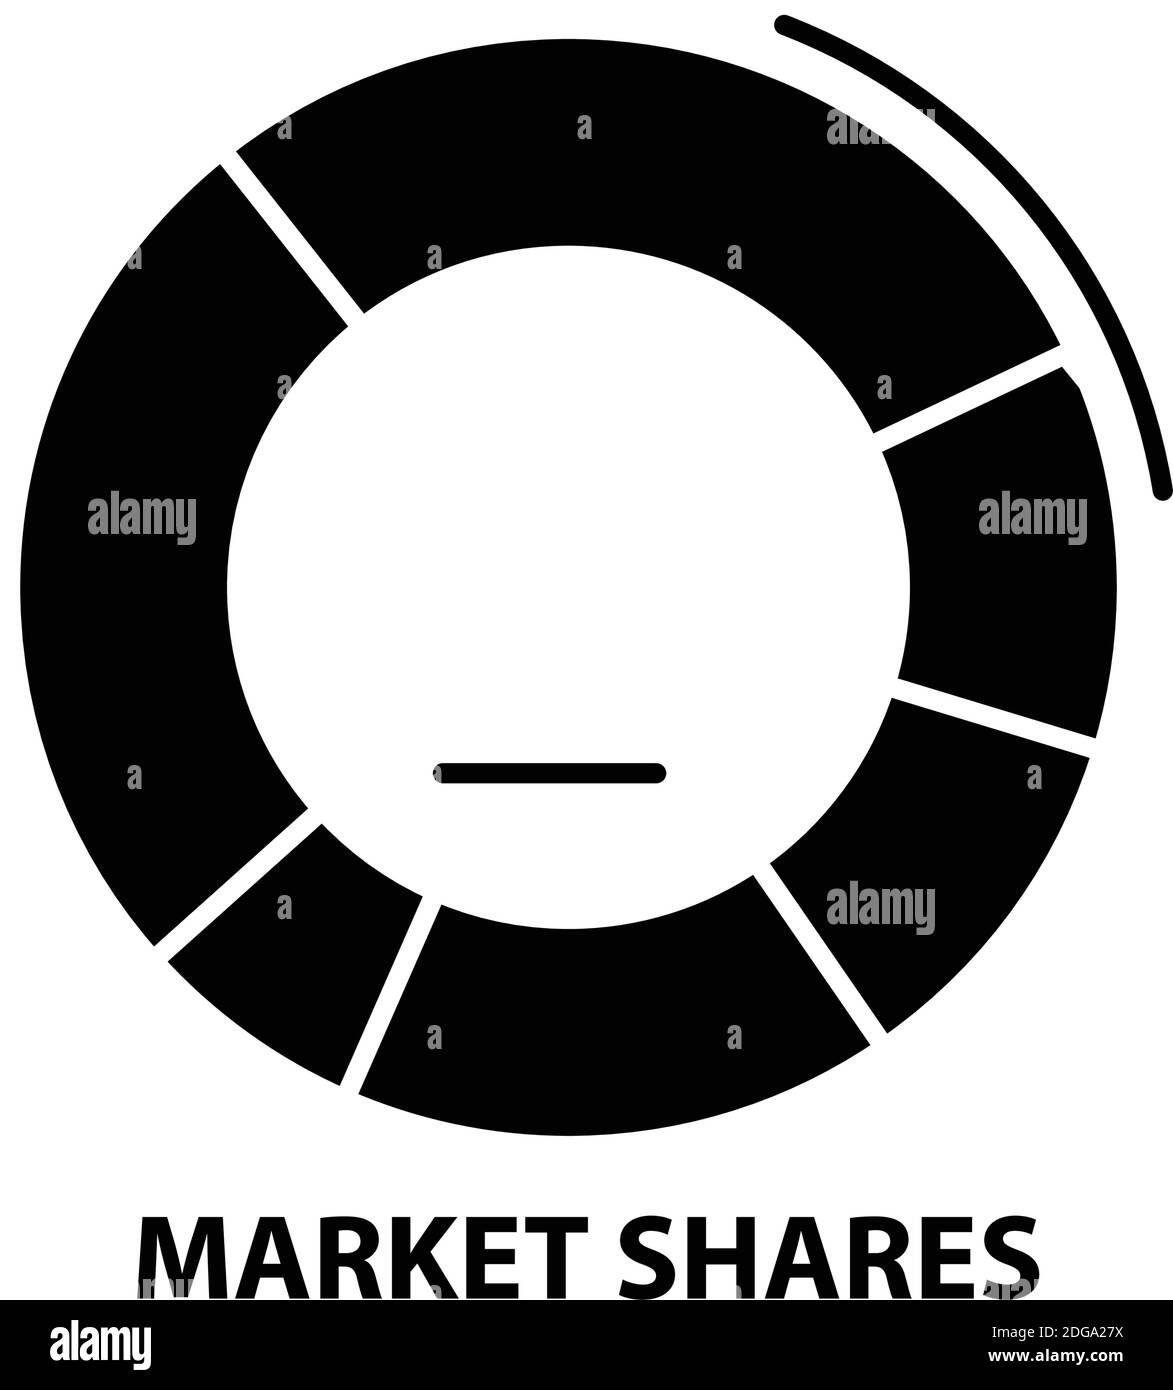 market shares icon, black vector sign with editable strokes, concept illustration Stock Vector